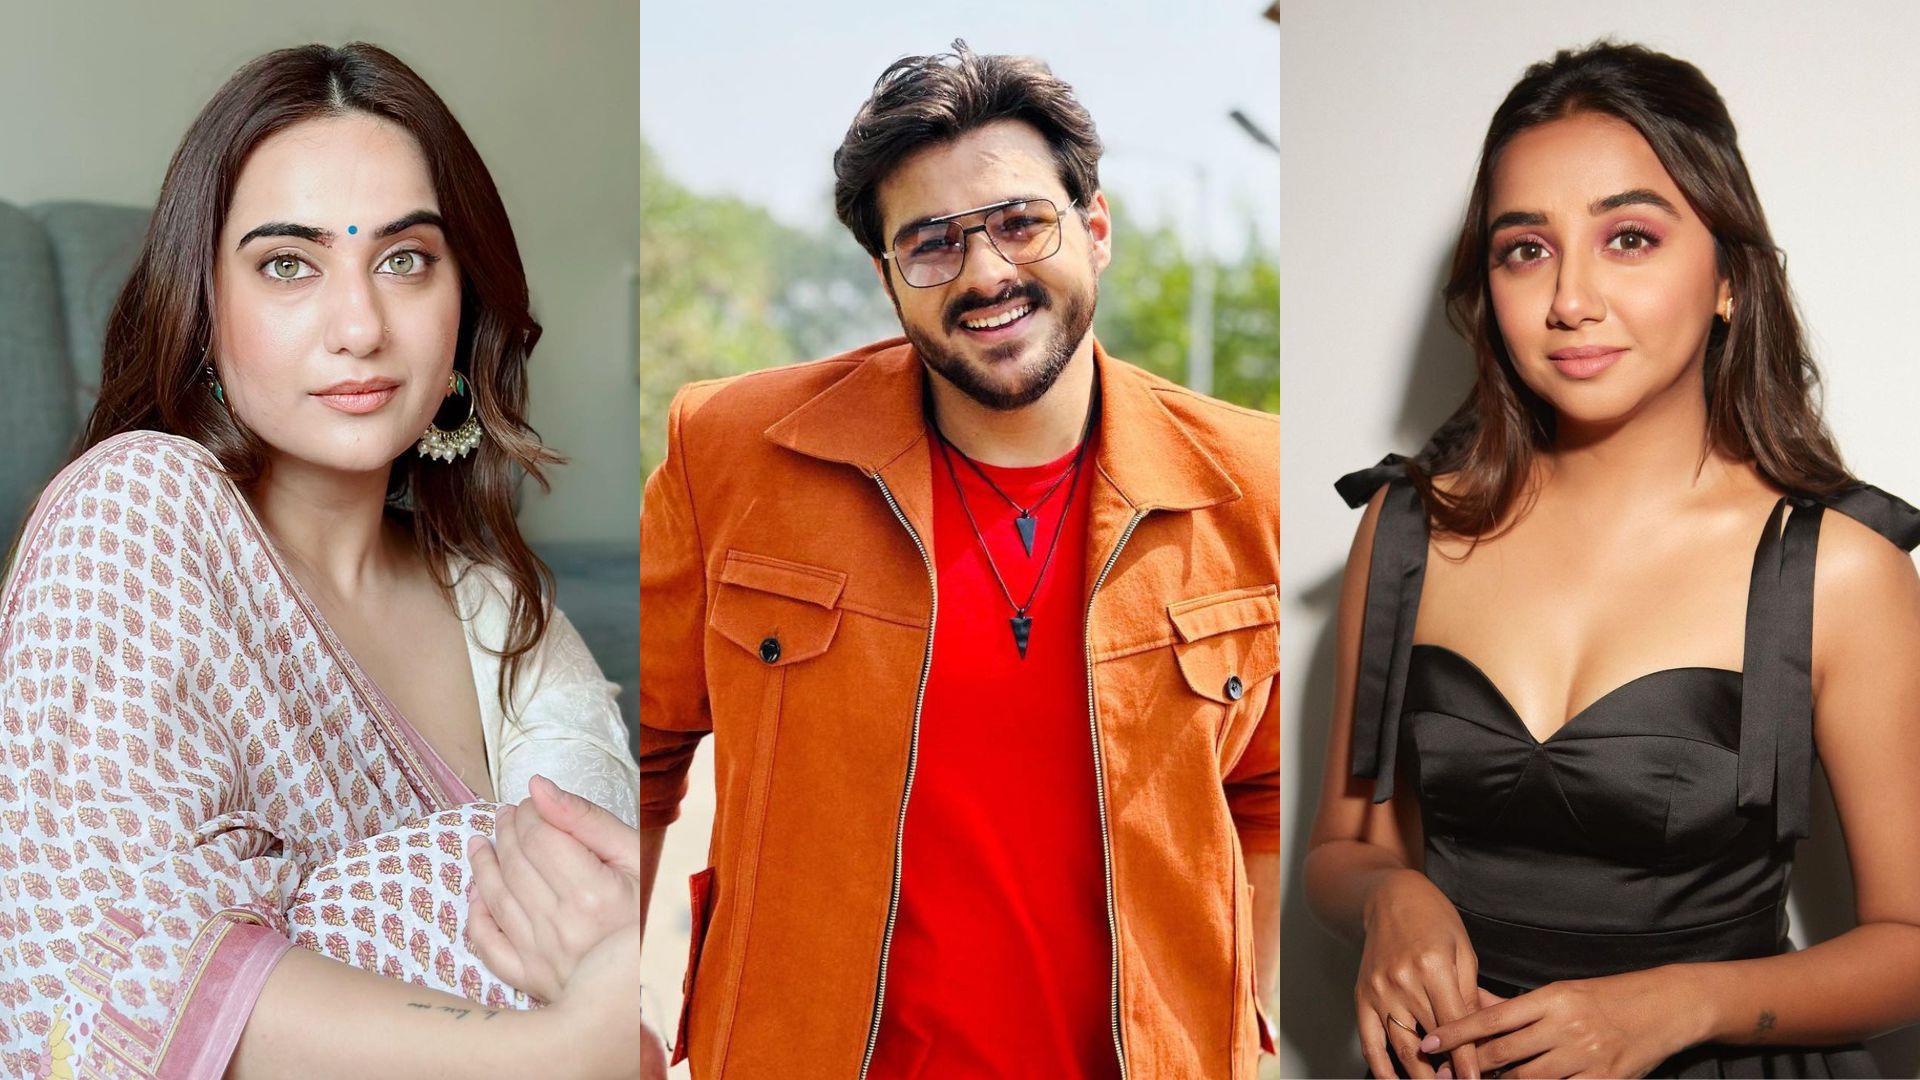 Top 15 Indian Instagram Influencers You Need to Follow Right Now